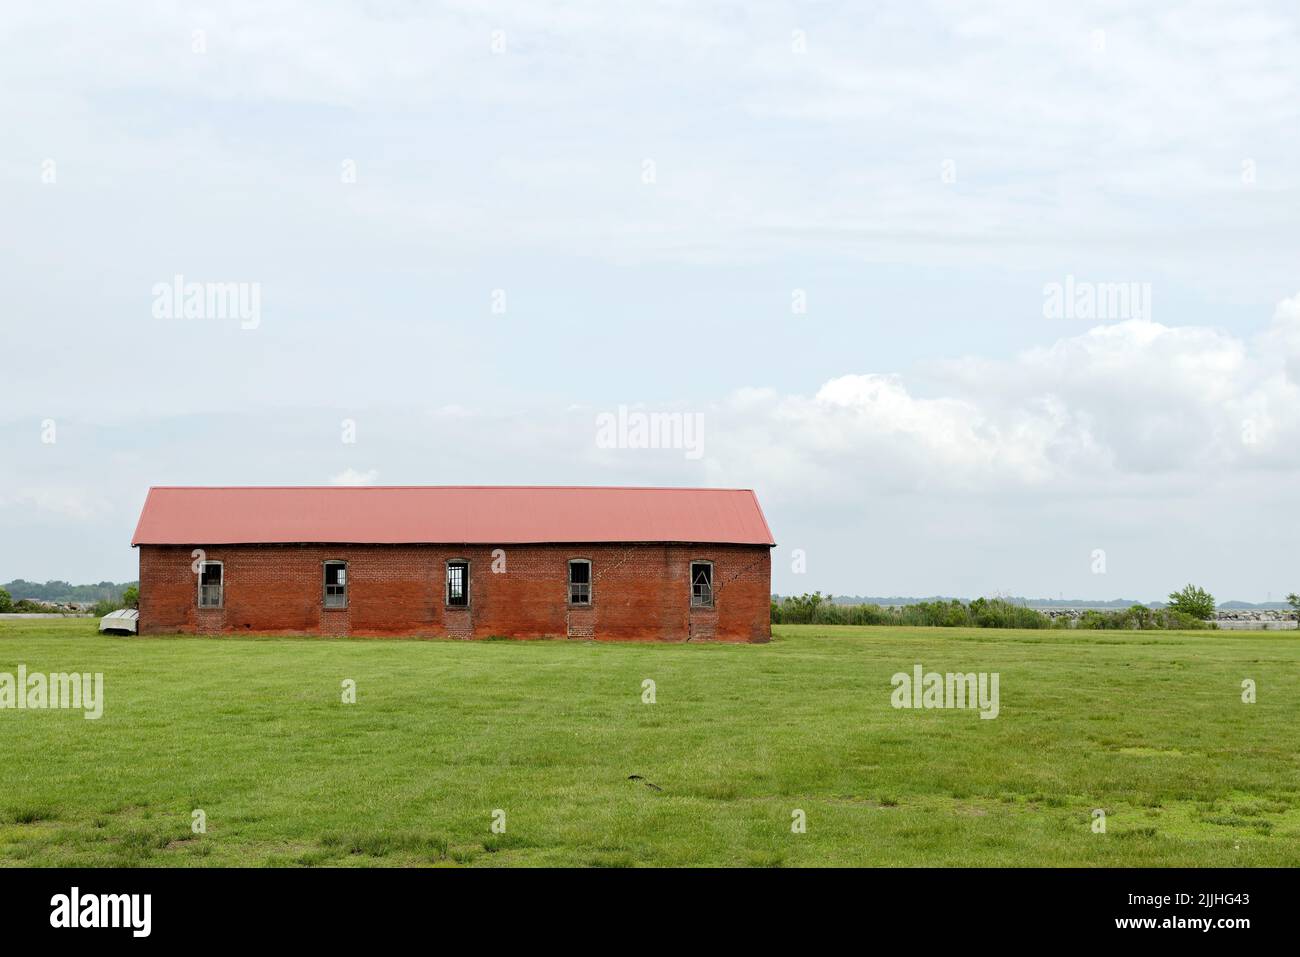 An old, empty red barn stands in a field on Pea Patch Island, Delaware, part of the Fort Delaware complex. Stock Photo